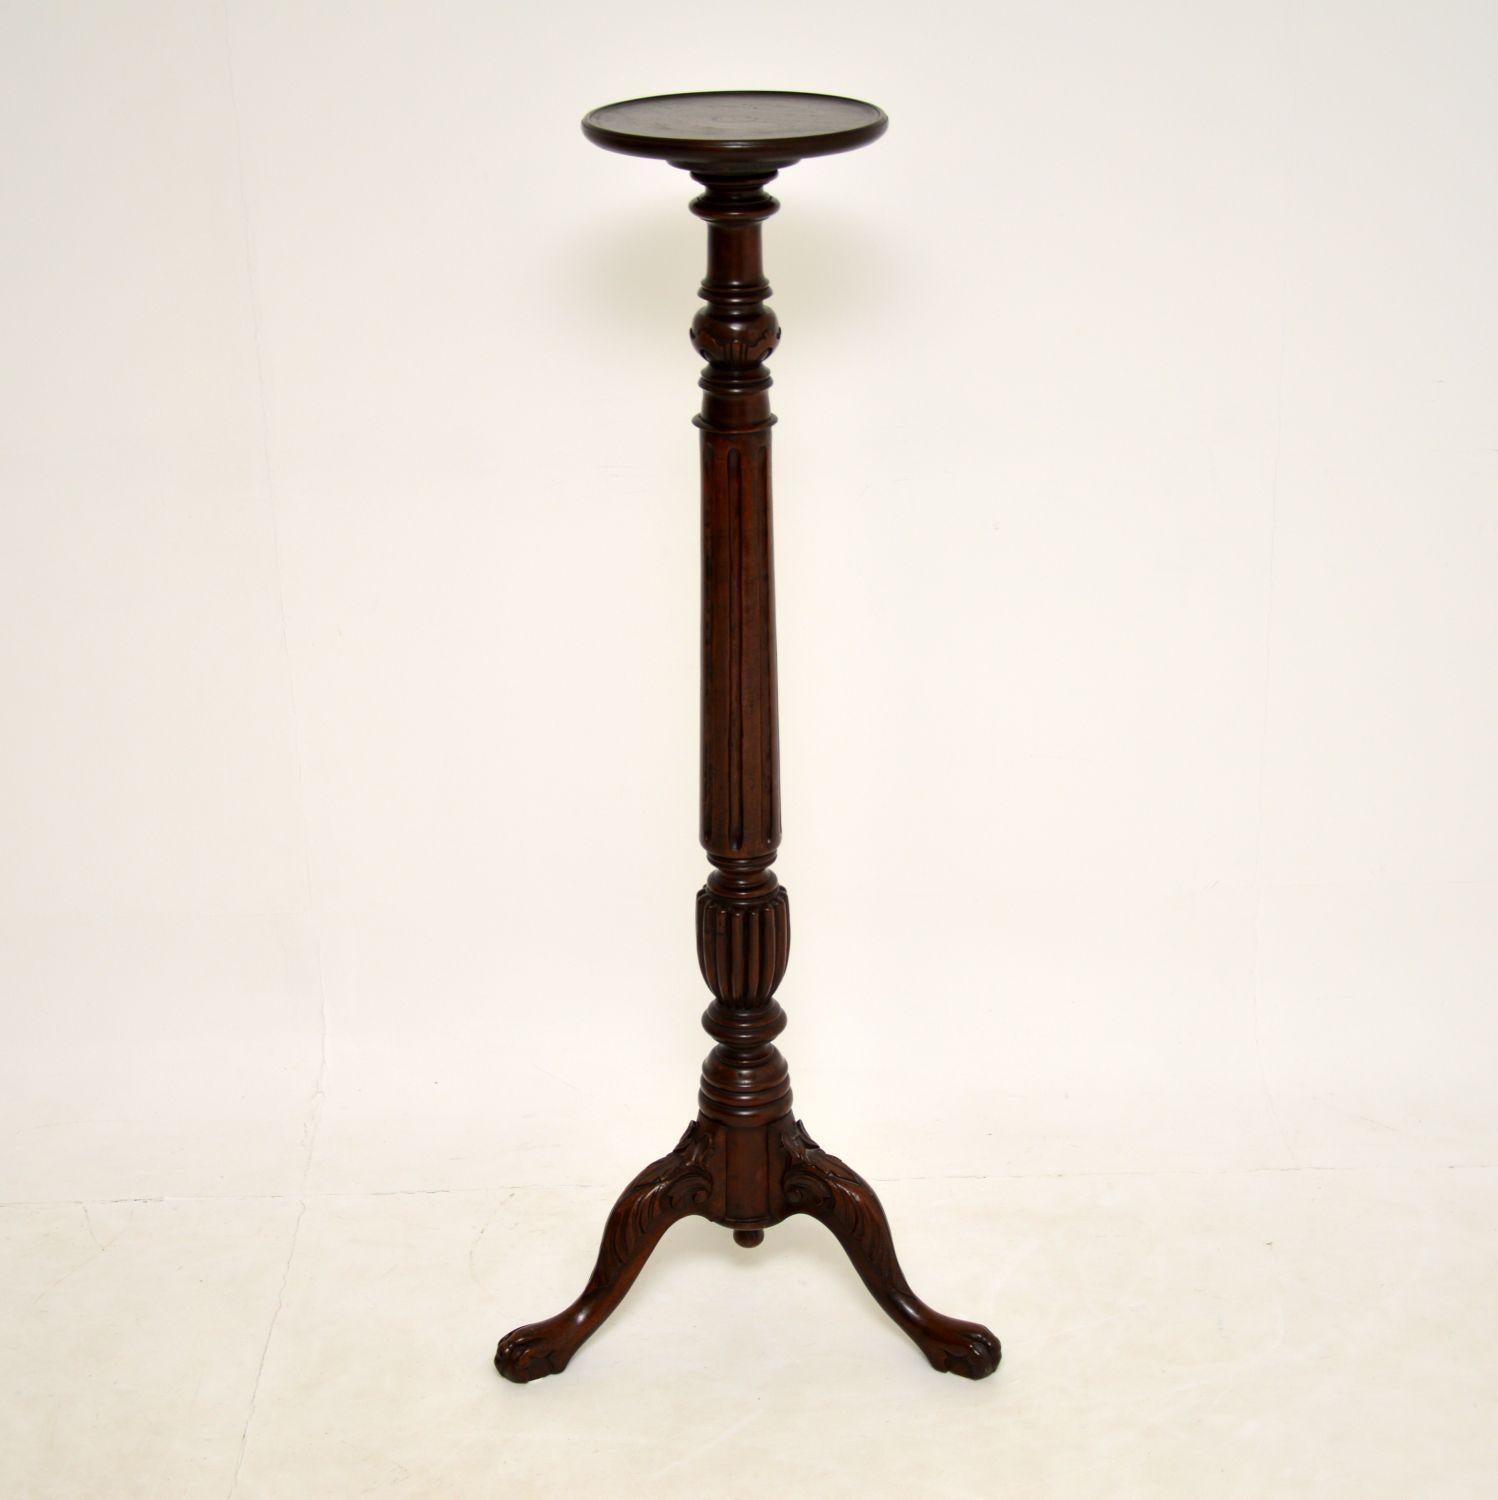 A beautifully carved antique torchere / plant table. This was made in England in the Victorian period, it dates from around 1850-1860’s period.

The quality is amazing, the carving is deep and finely executed. The upright section is well turned &